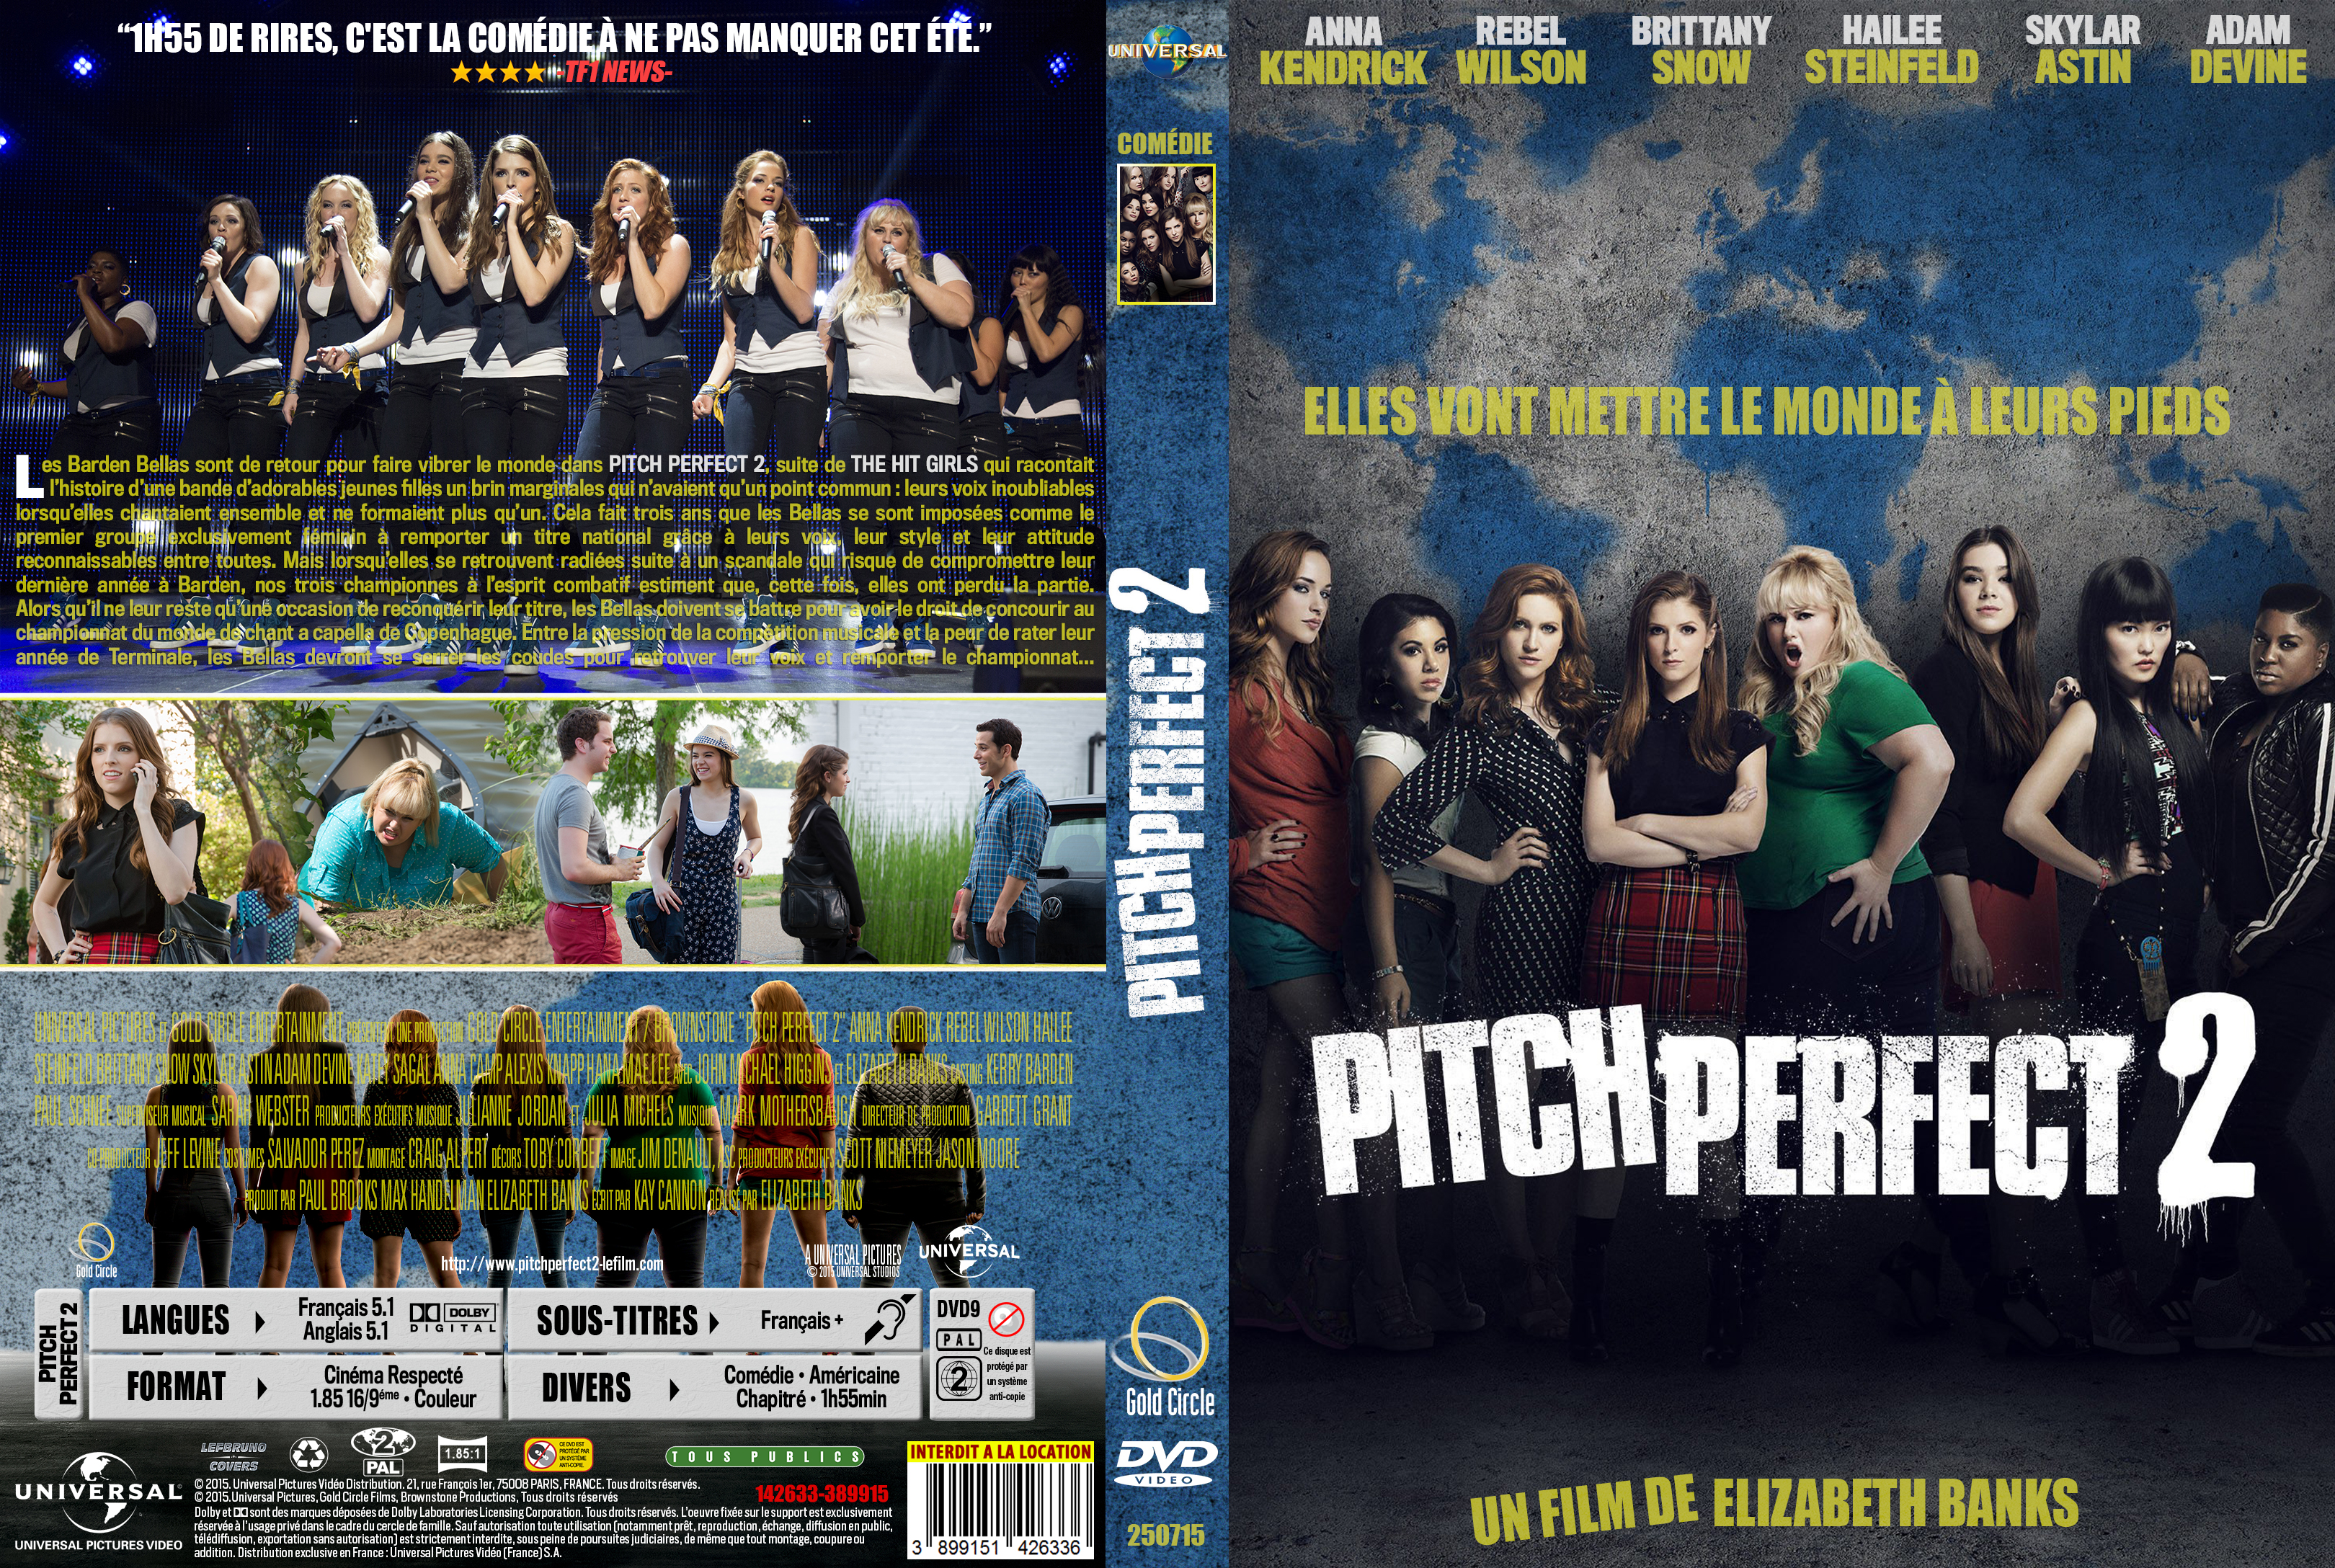 Jaquette DVD Pitch Perfect 2 custom